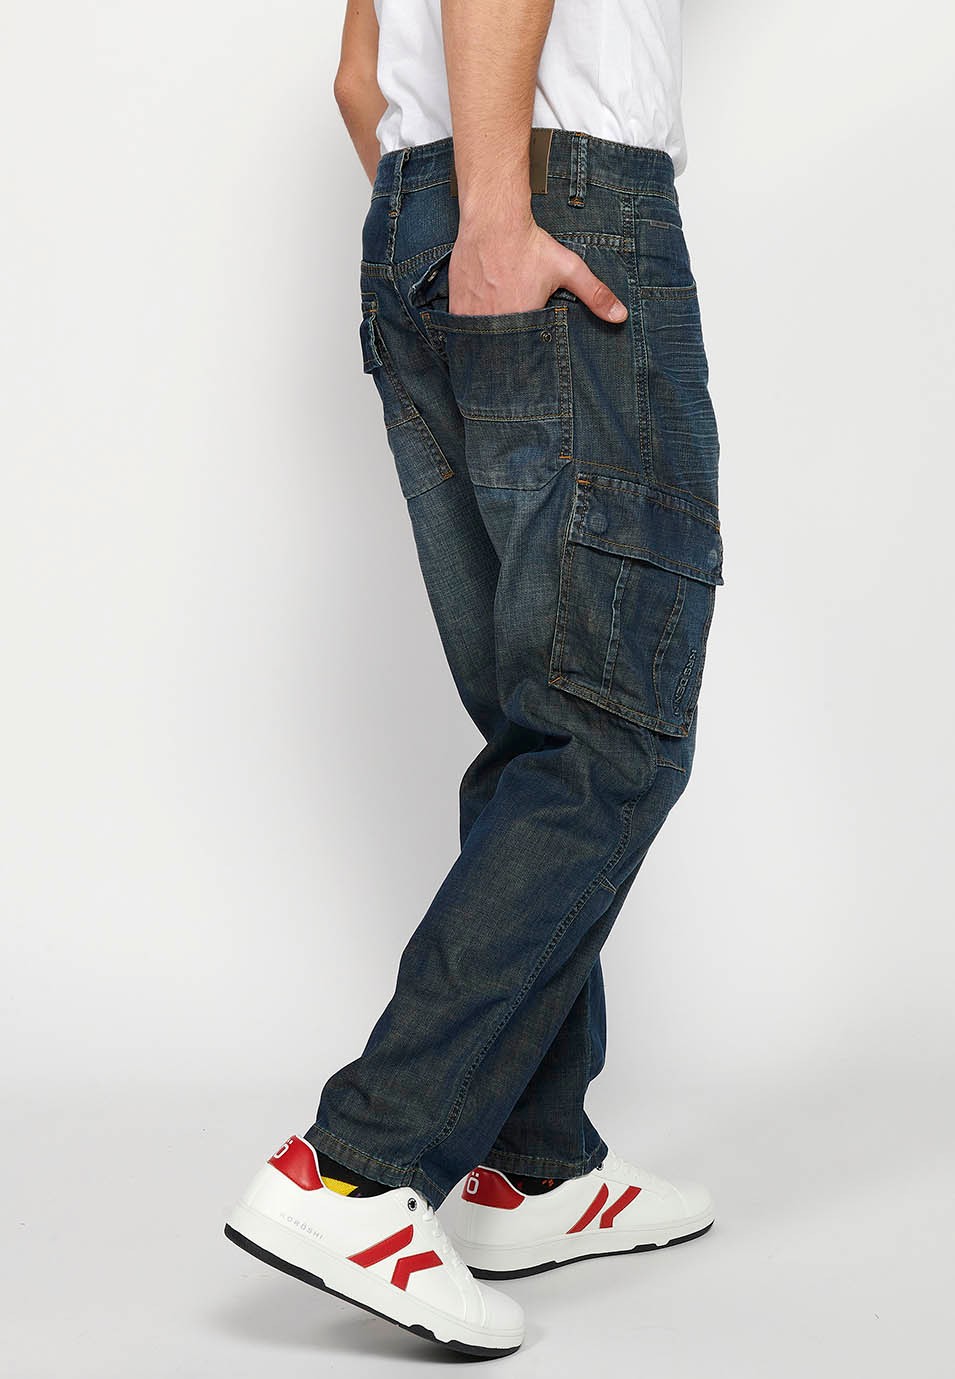 Long Cargo Pants with Front Zipper and Button Closure with Side Flap Pockets in Dark Blue for Men 9